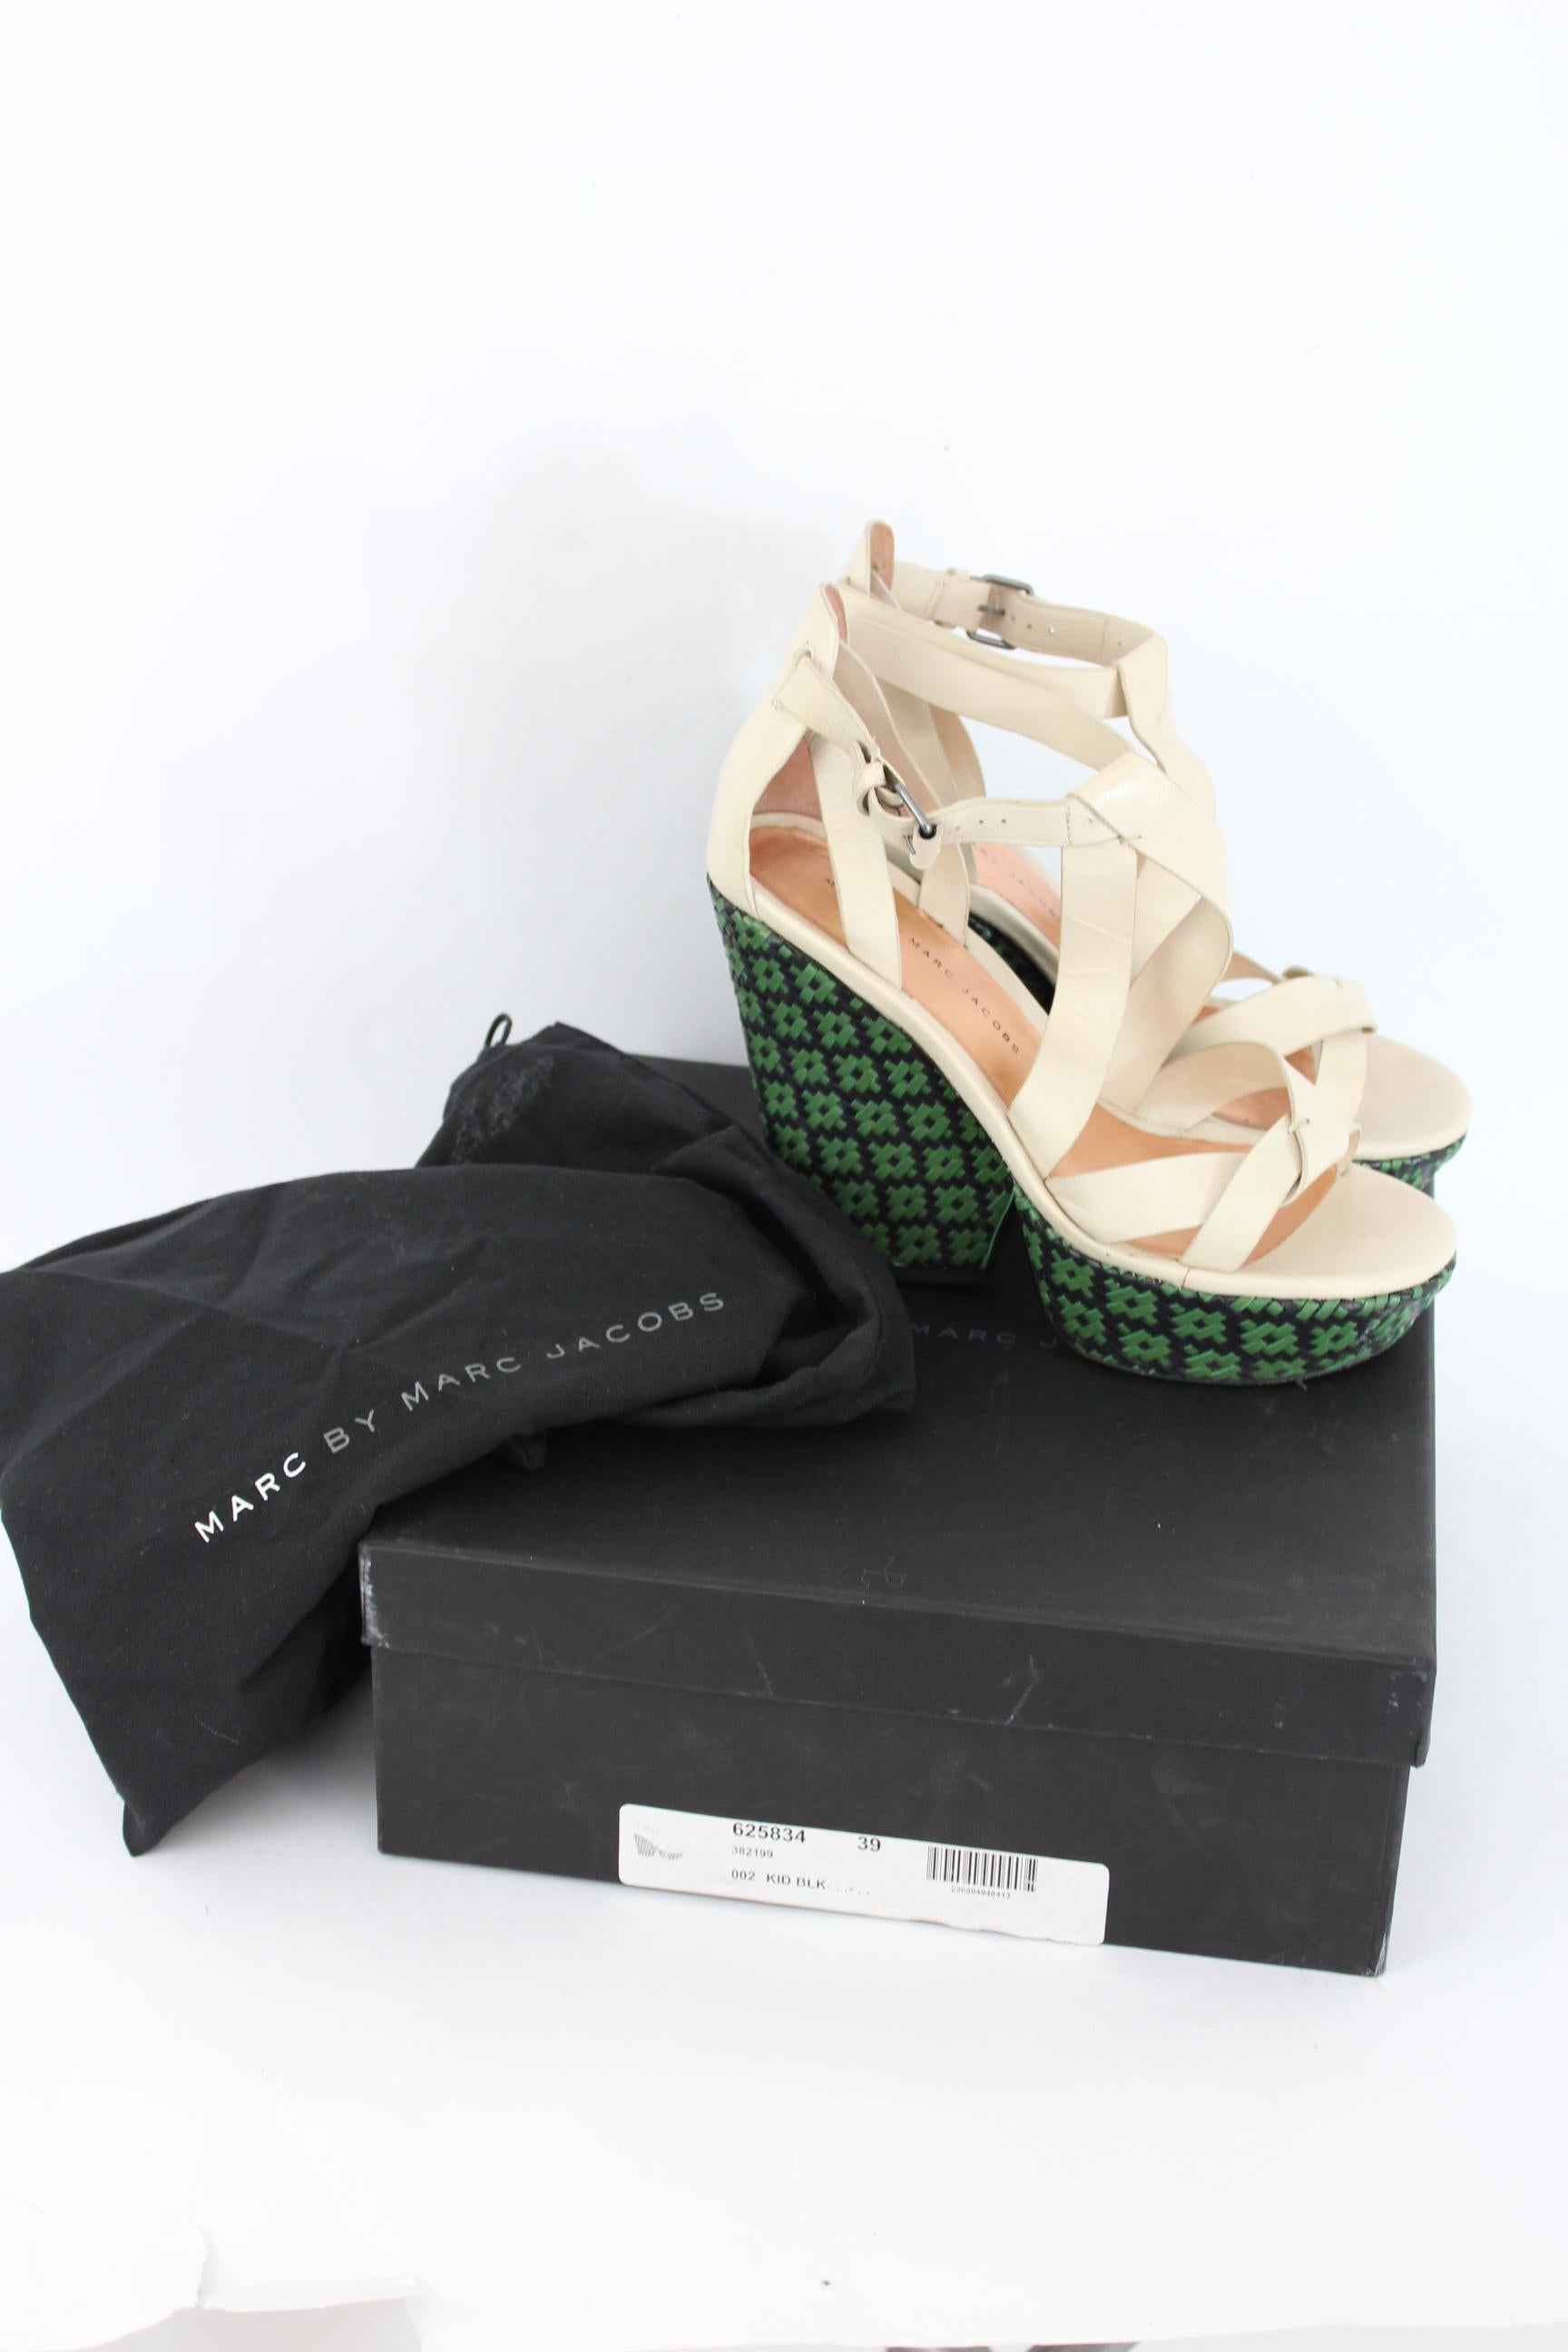 Marc By Marc Jacobs Leather Beige Green Open Toe Sandal Wedge Heel Shoes In Good Condition For Sale In Brindisi, Bt